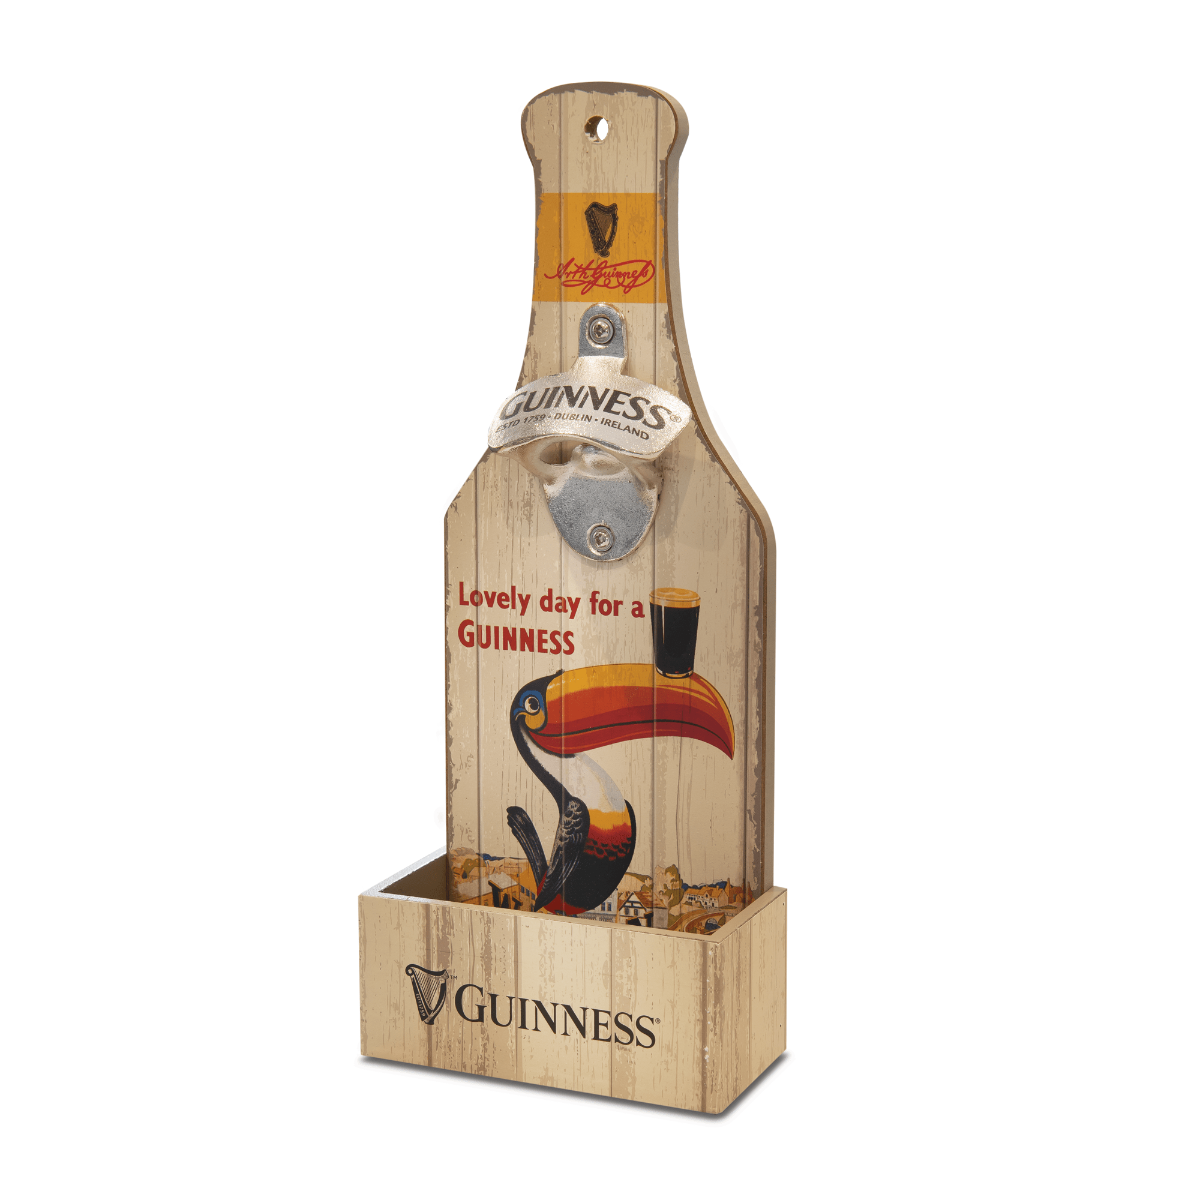 Get the perfect bar gift with this Guinness Ultimate Toucan Home Bar Pack featuring a toucan. This merchandise is a must-have for any Guinness enthusiast.